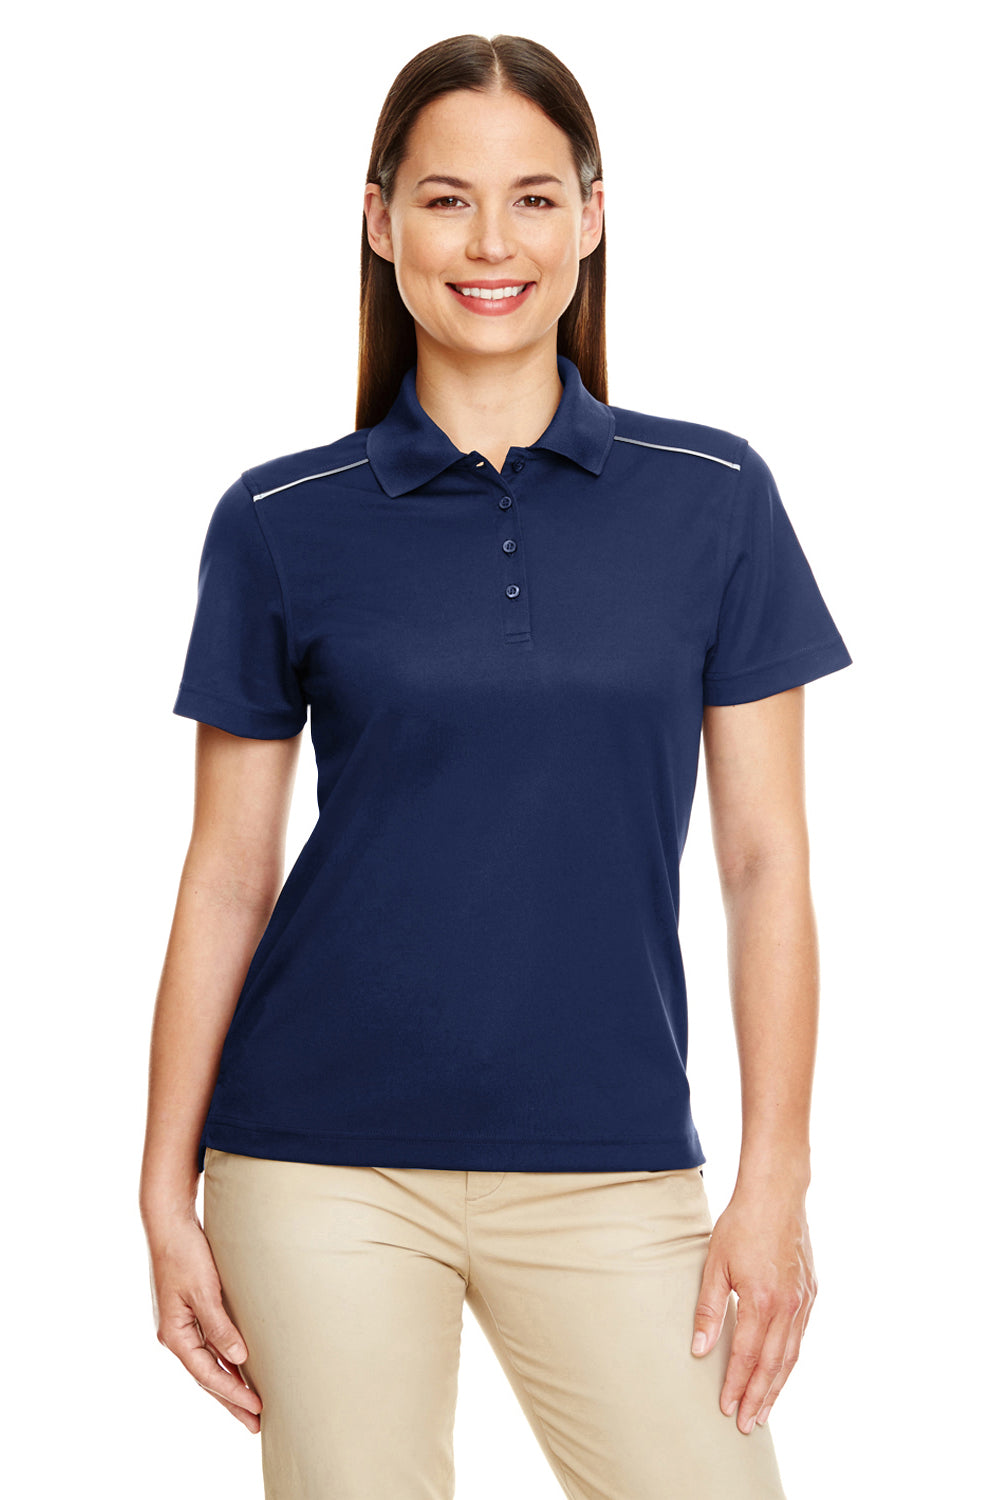 Core 365 78181R Womens Radiant Performance Moisture Wicking Short Sleeve Polo Shirt Navy Blue Front